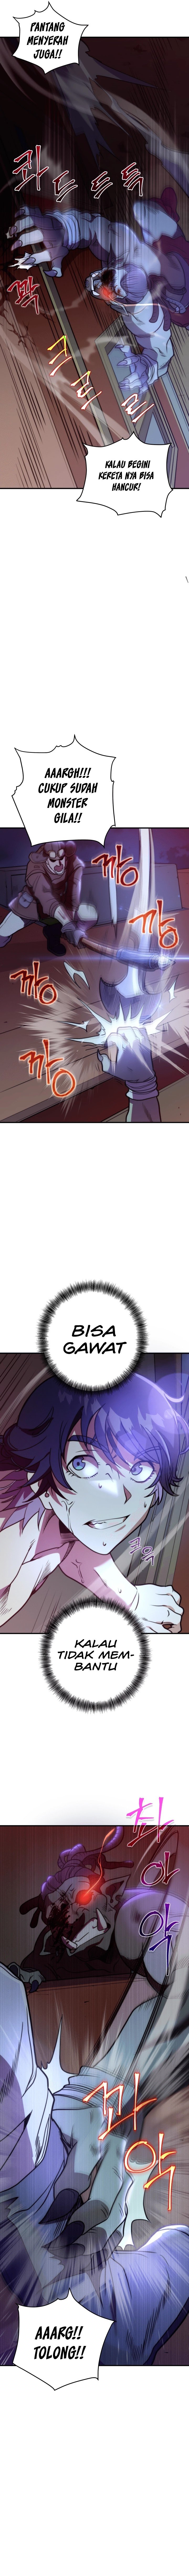 1rm’s Gigant Rider Chapter 3